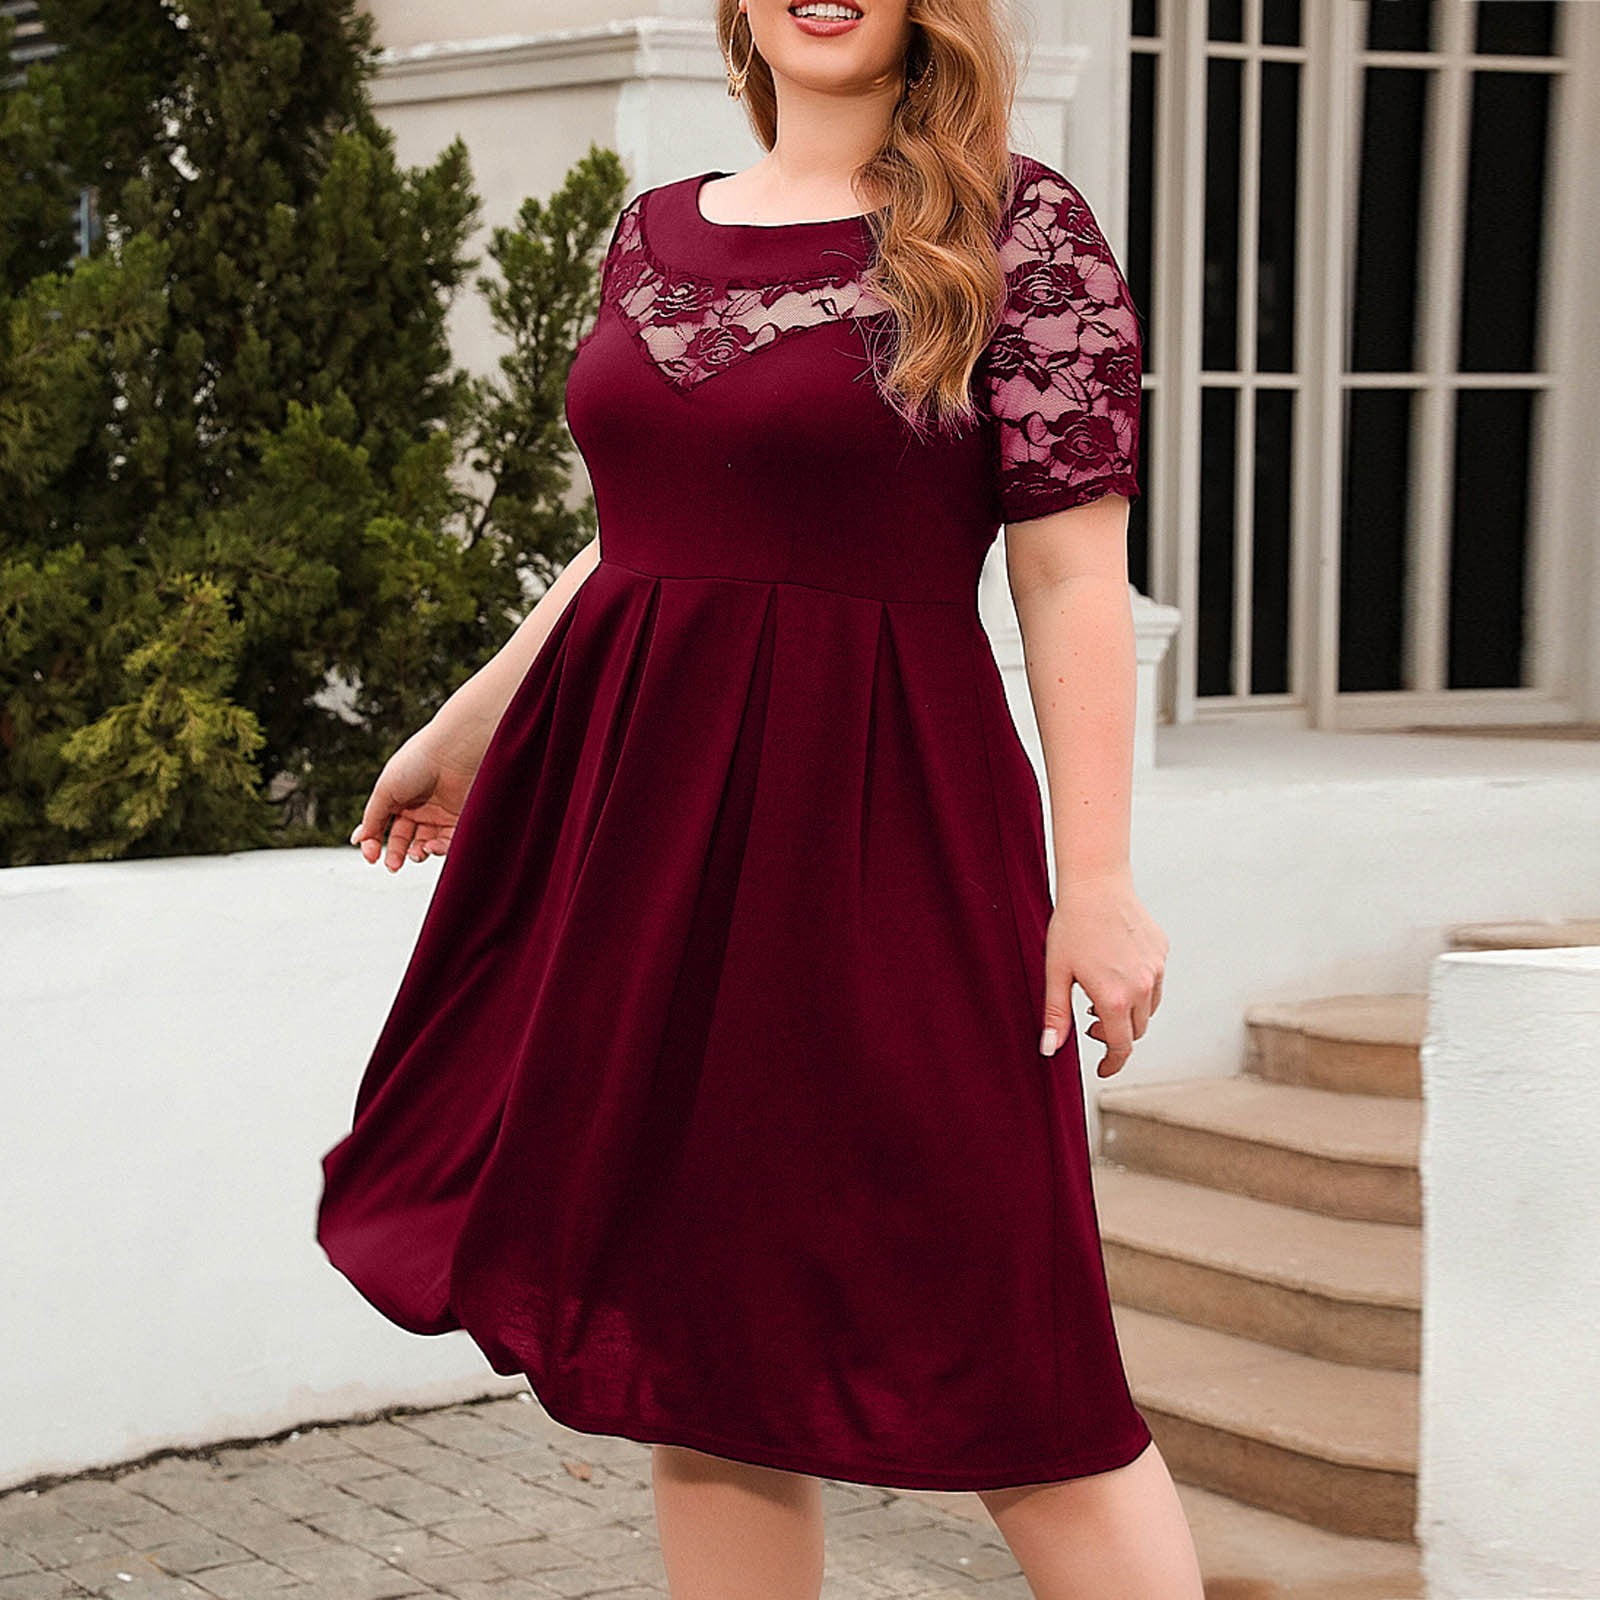 Burgundy Floral Swing Dress  Plus size legging outfits, Plus size